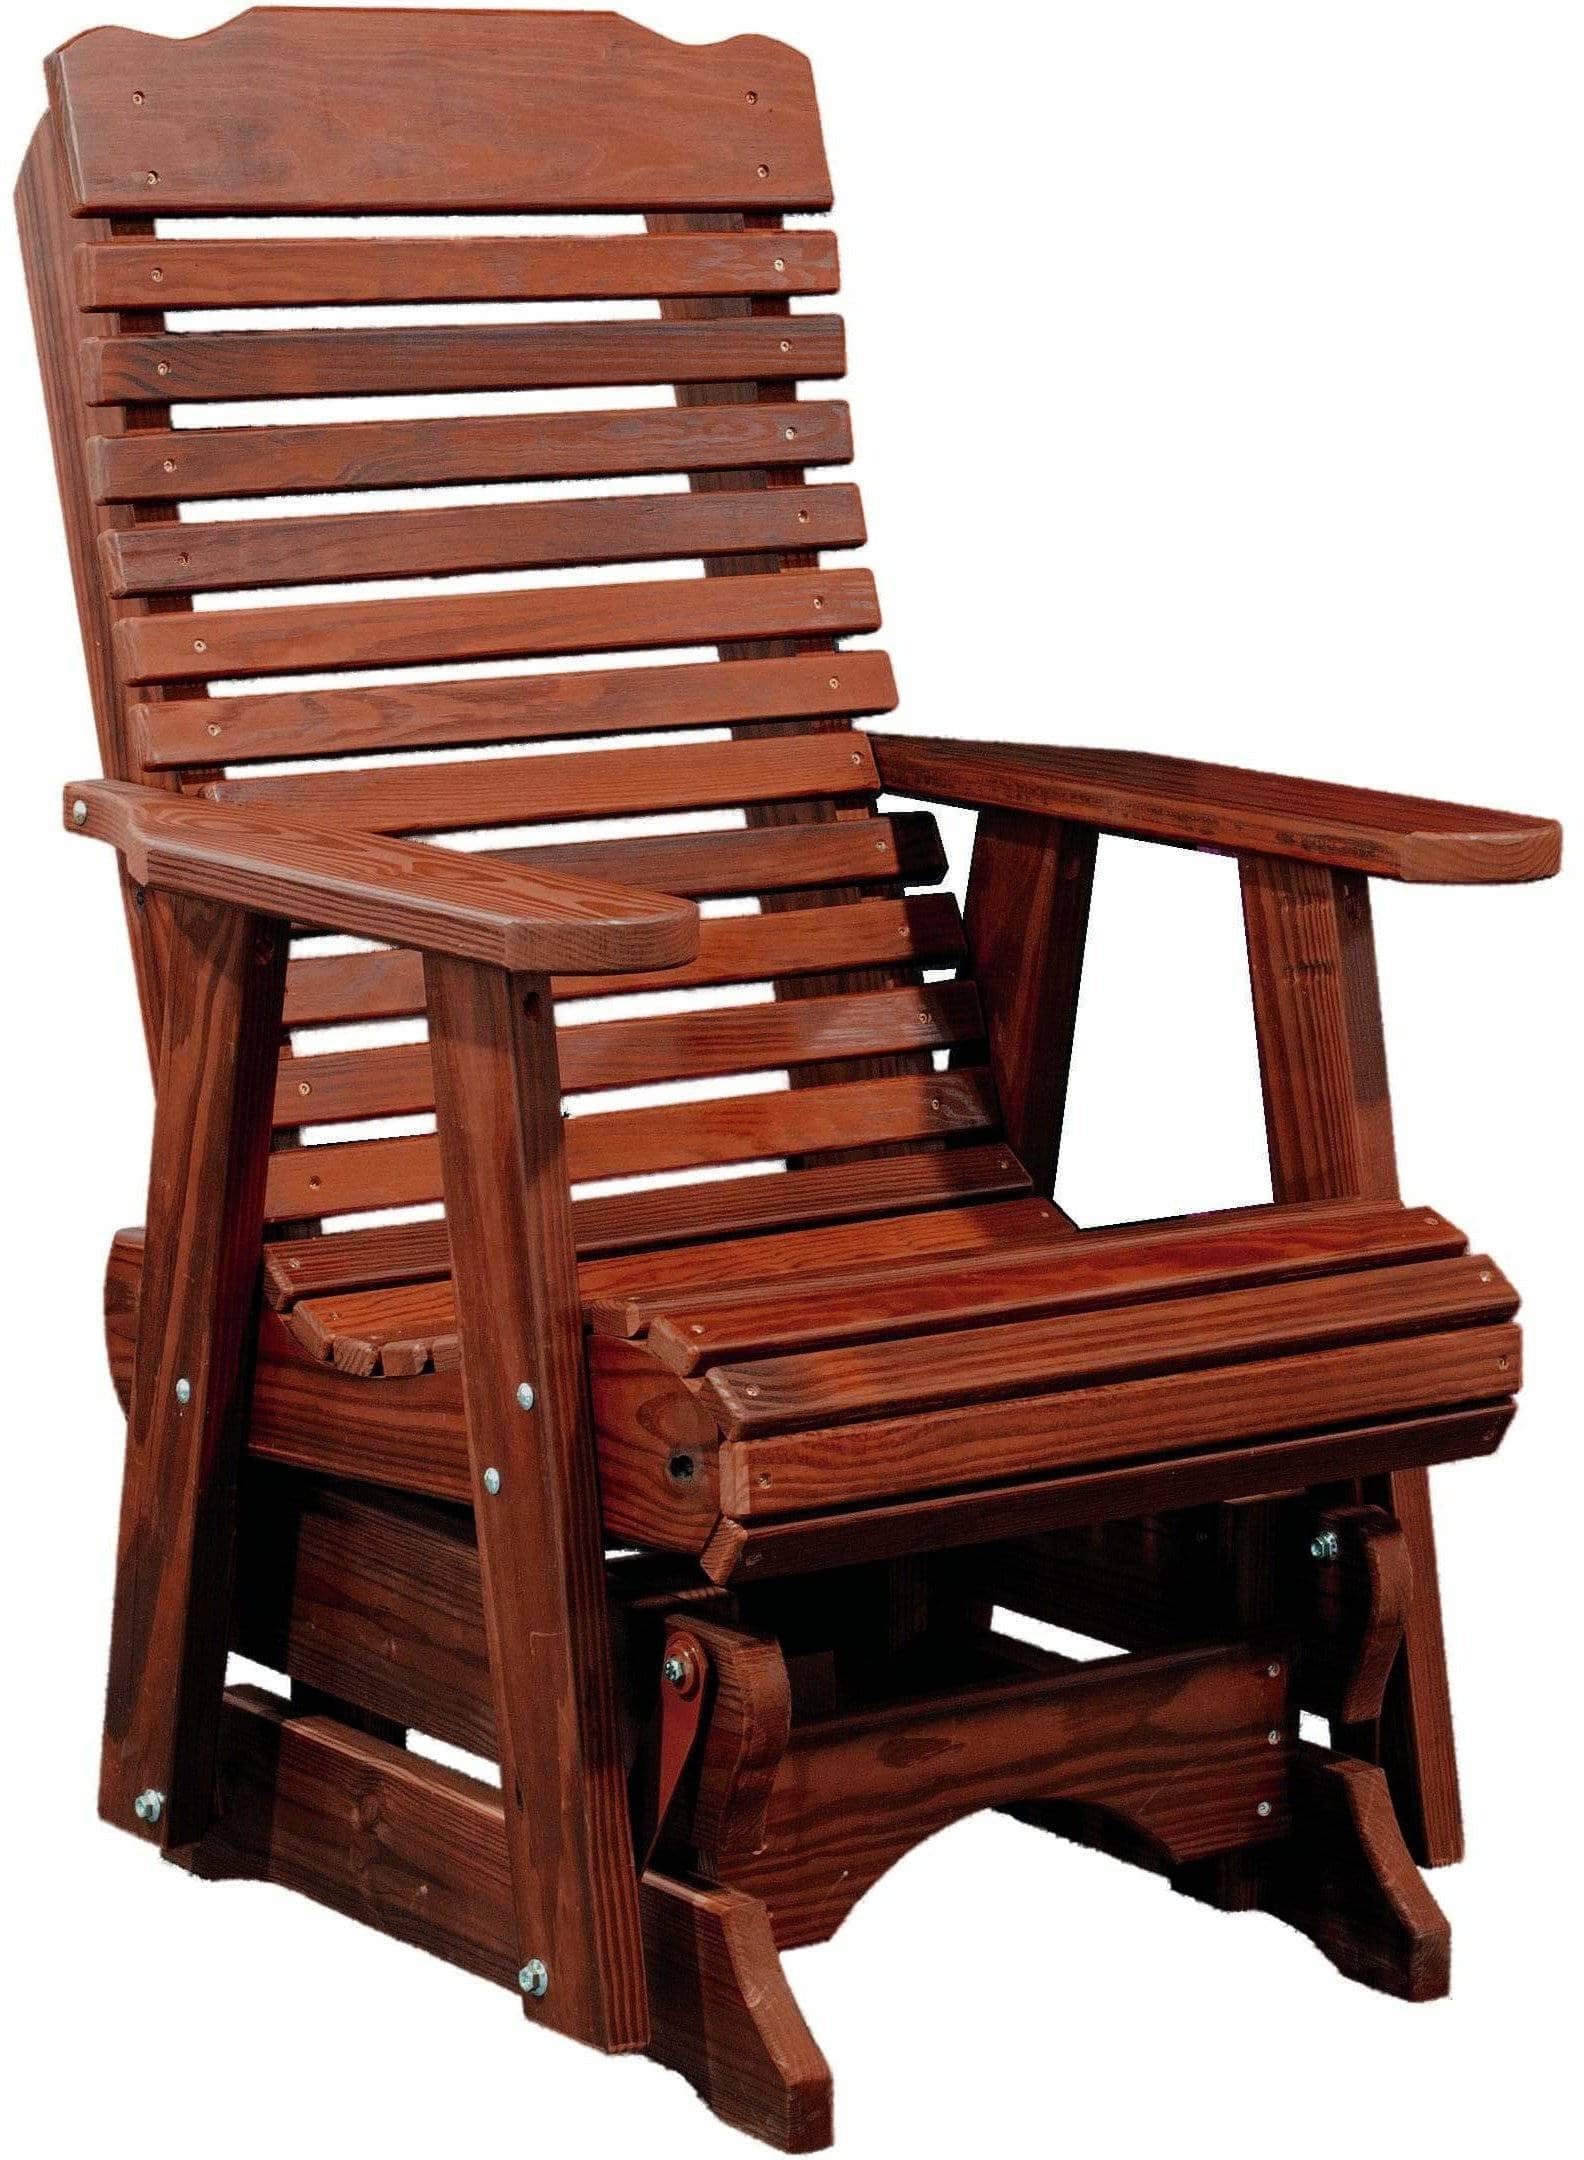 Nature’s Lawn & Patio Wood Contoured Glider Chair-Rustic Furniture Marketplace